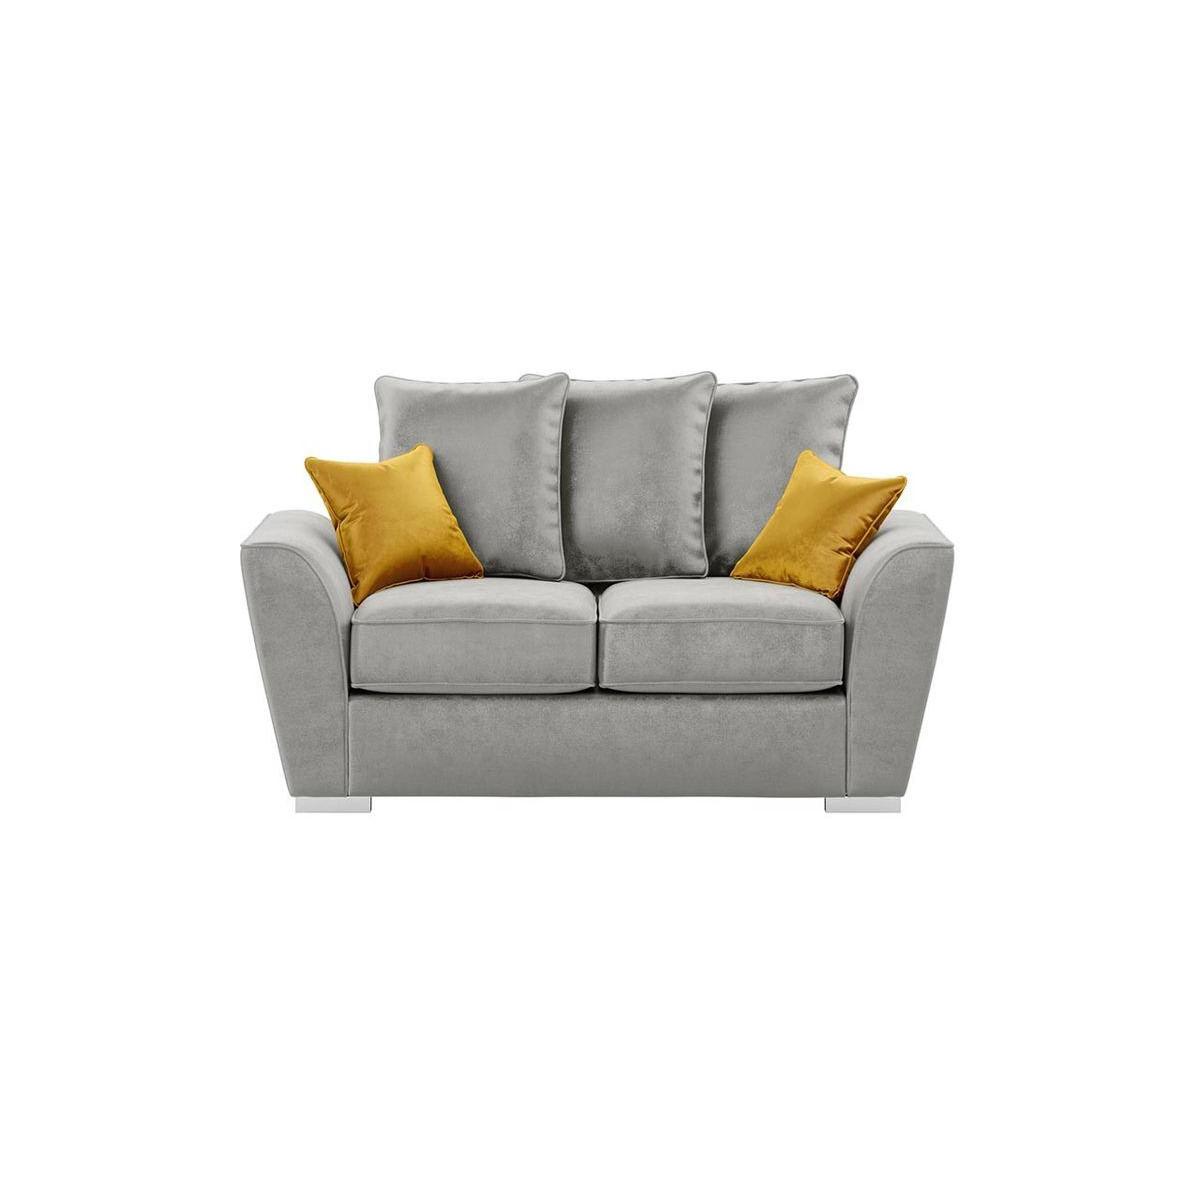 Majestic 2 Seater Sofa with Loose Back Cushions, silver/mustard - image 1